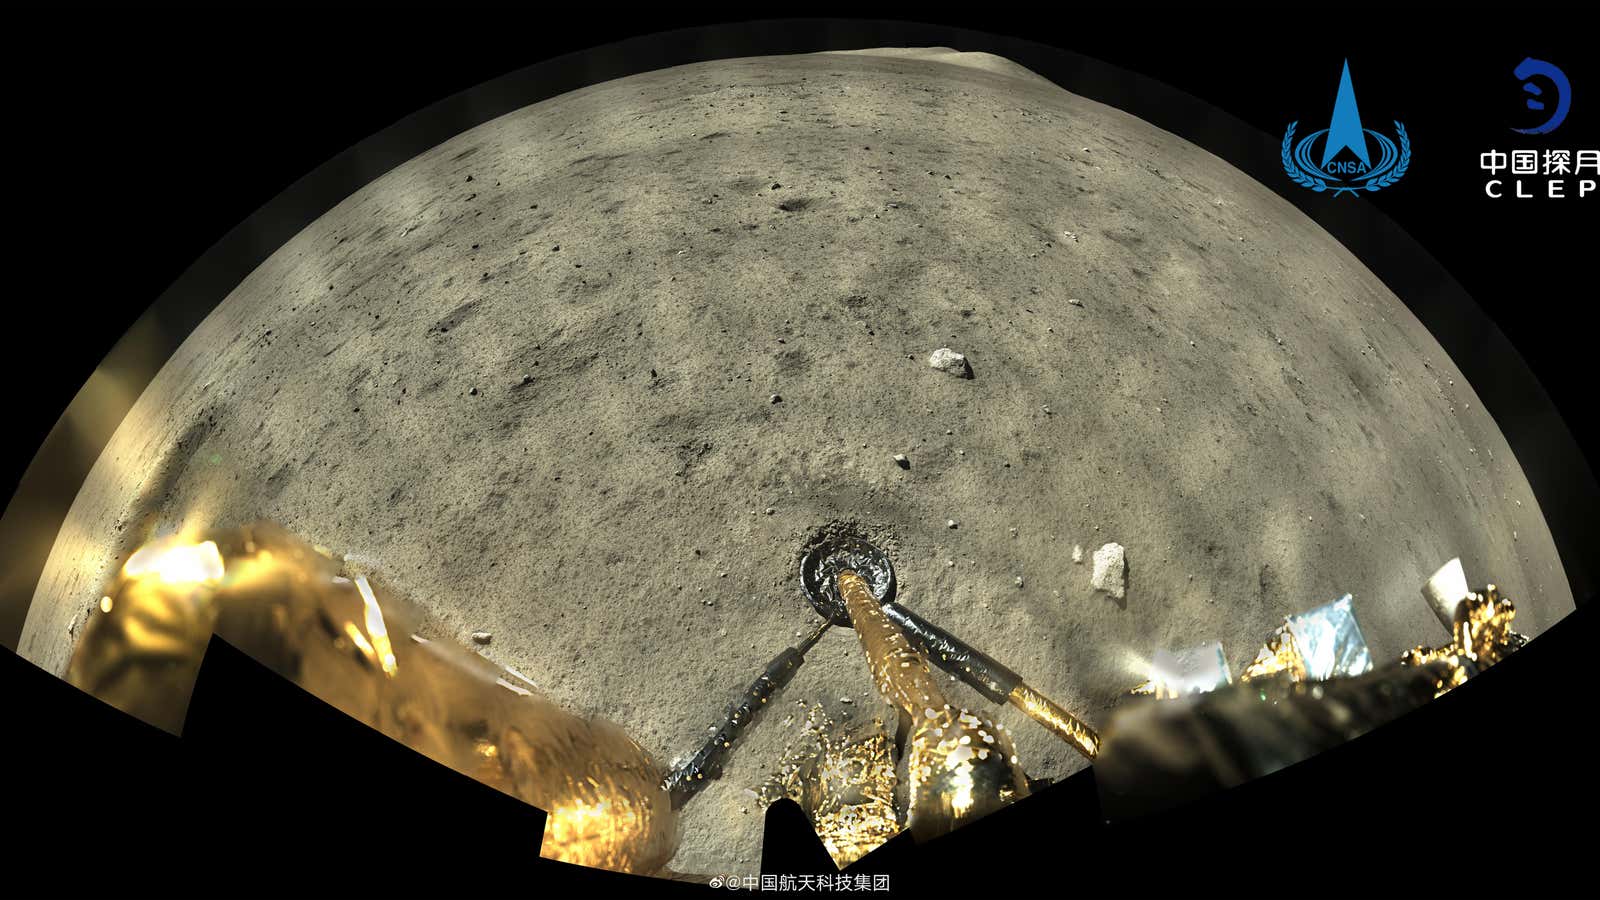 A lunar panorama snapped by Chinaâ€™s Changâ€™e 5 moon lander.